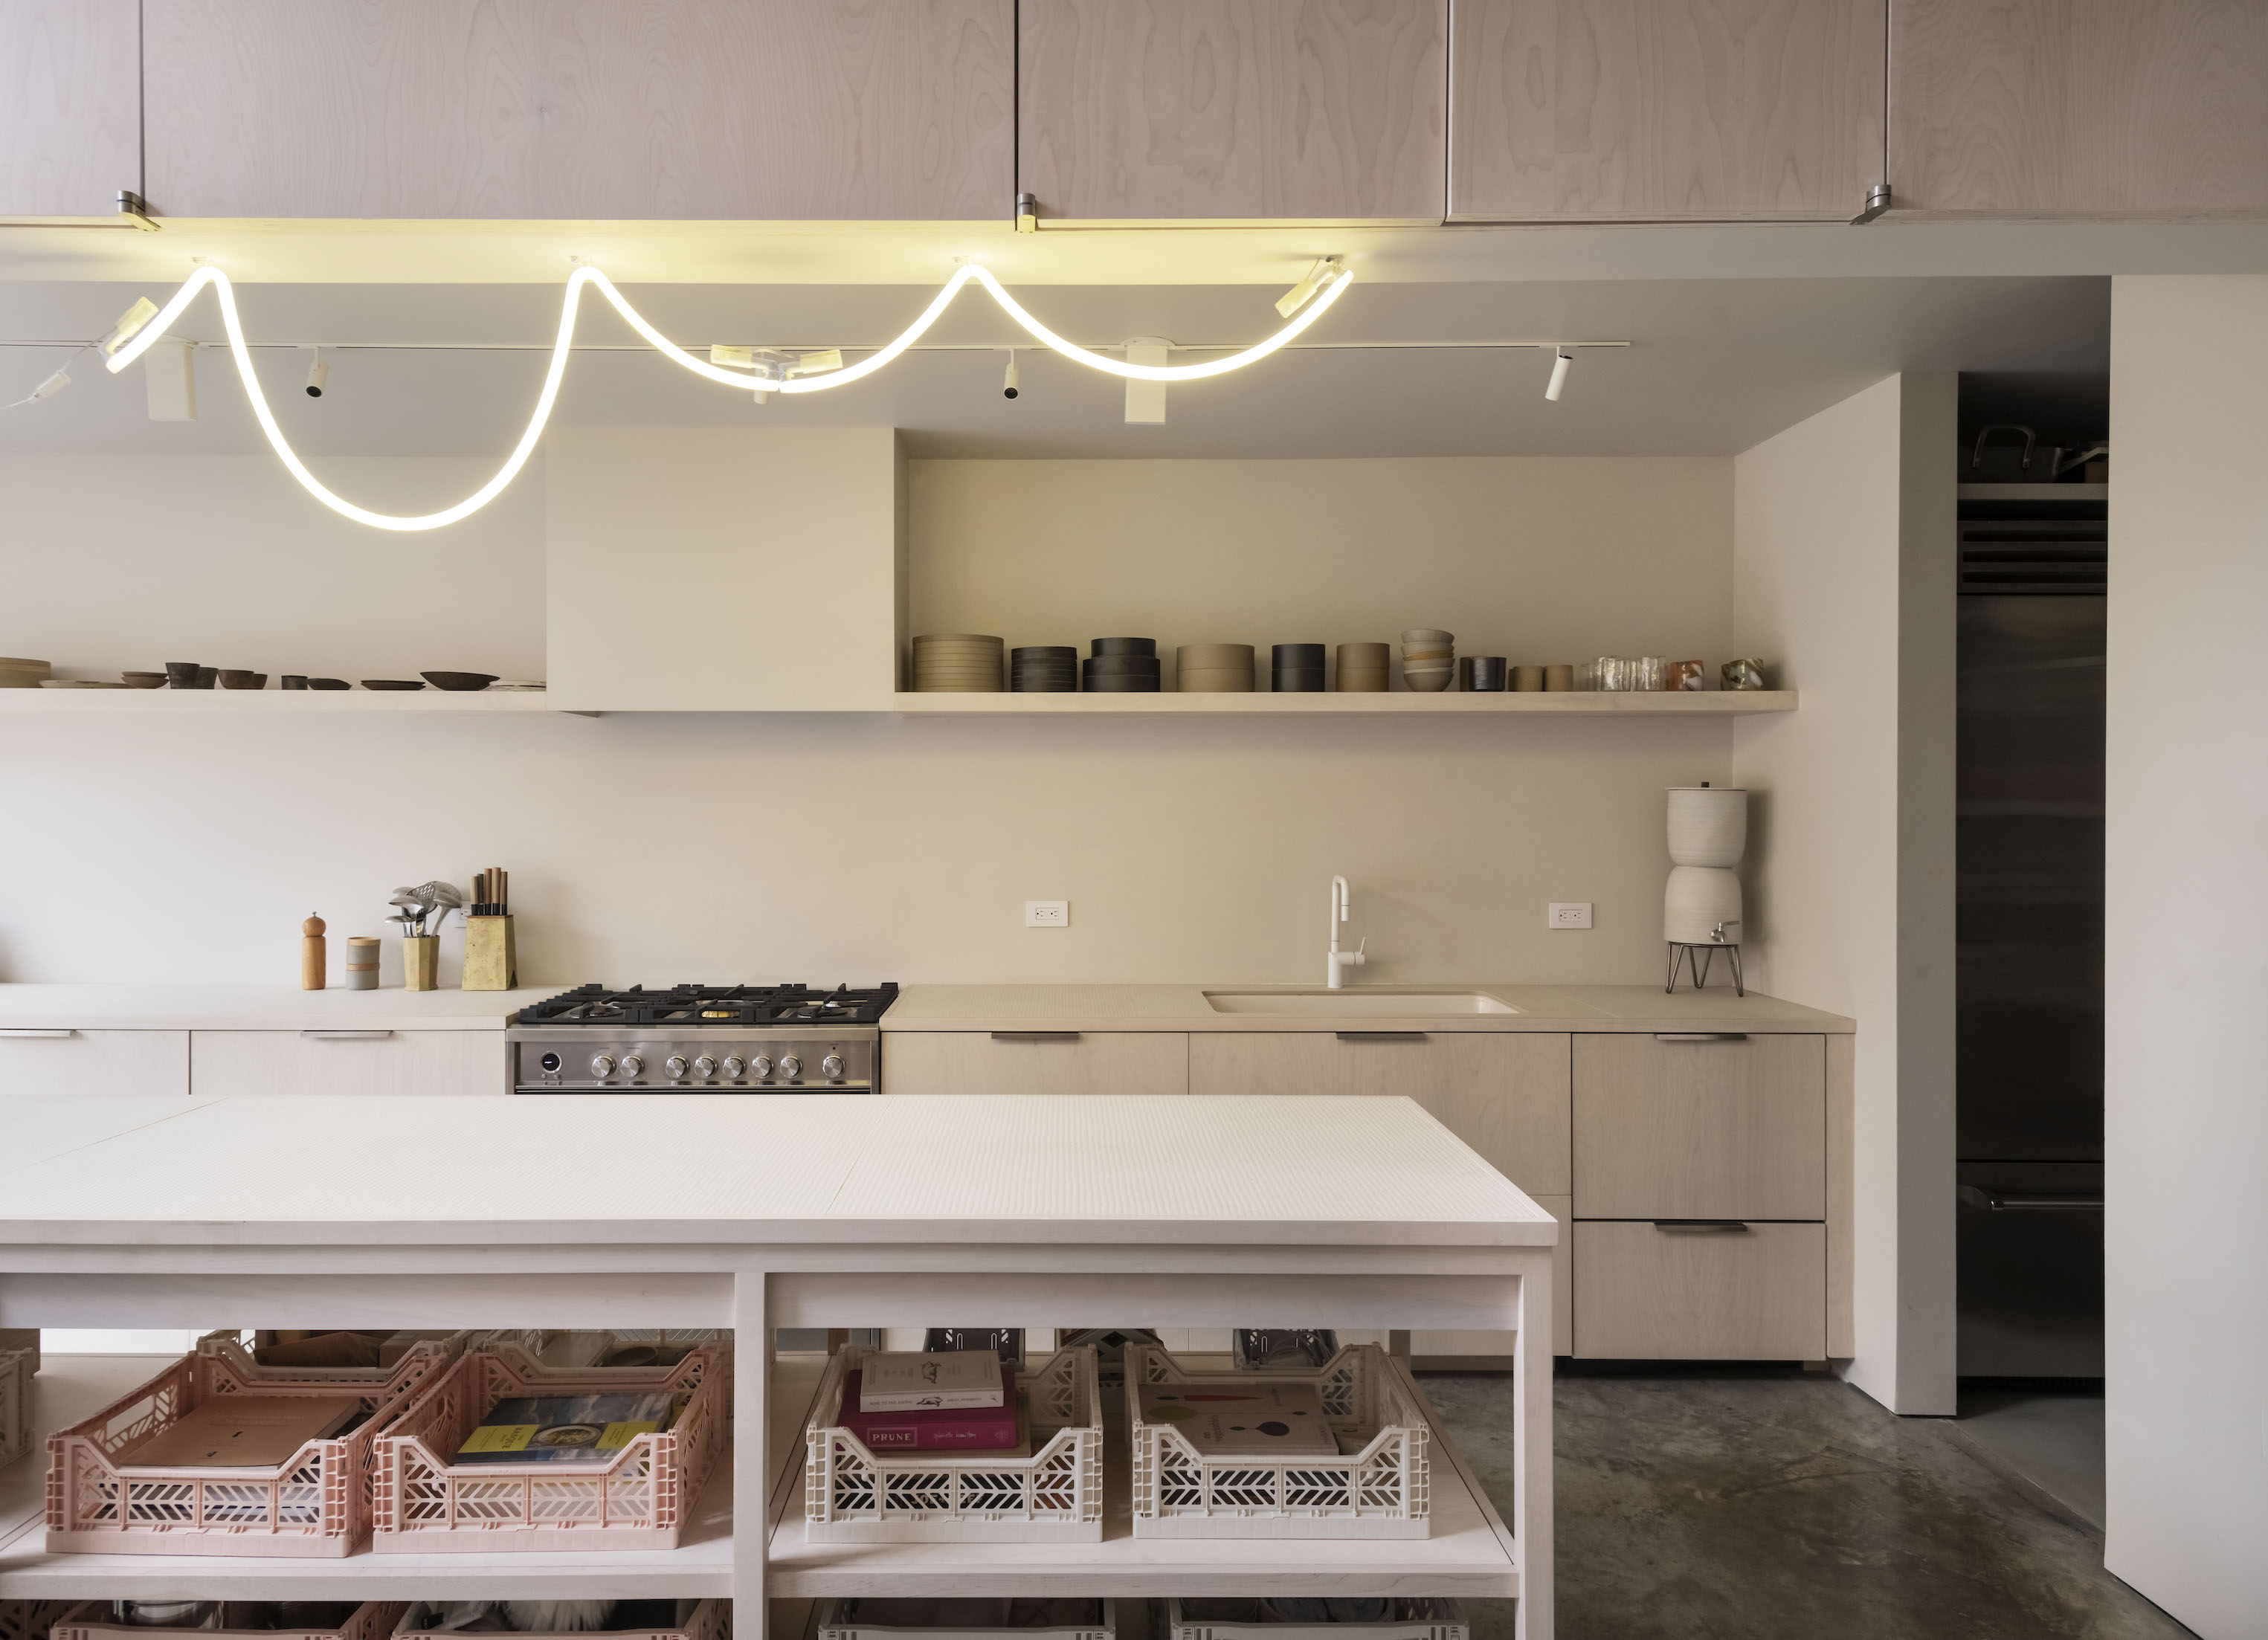 Steal This Look: A Pastel Modern Kitchen Remodel in Brooklyn - Remodelista